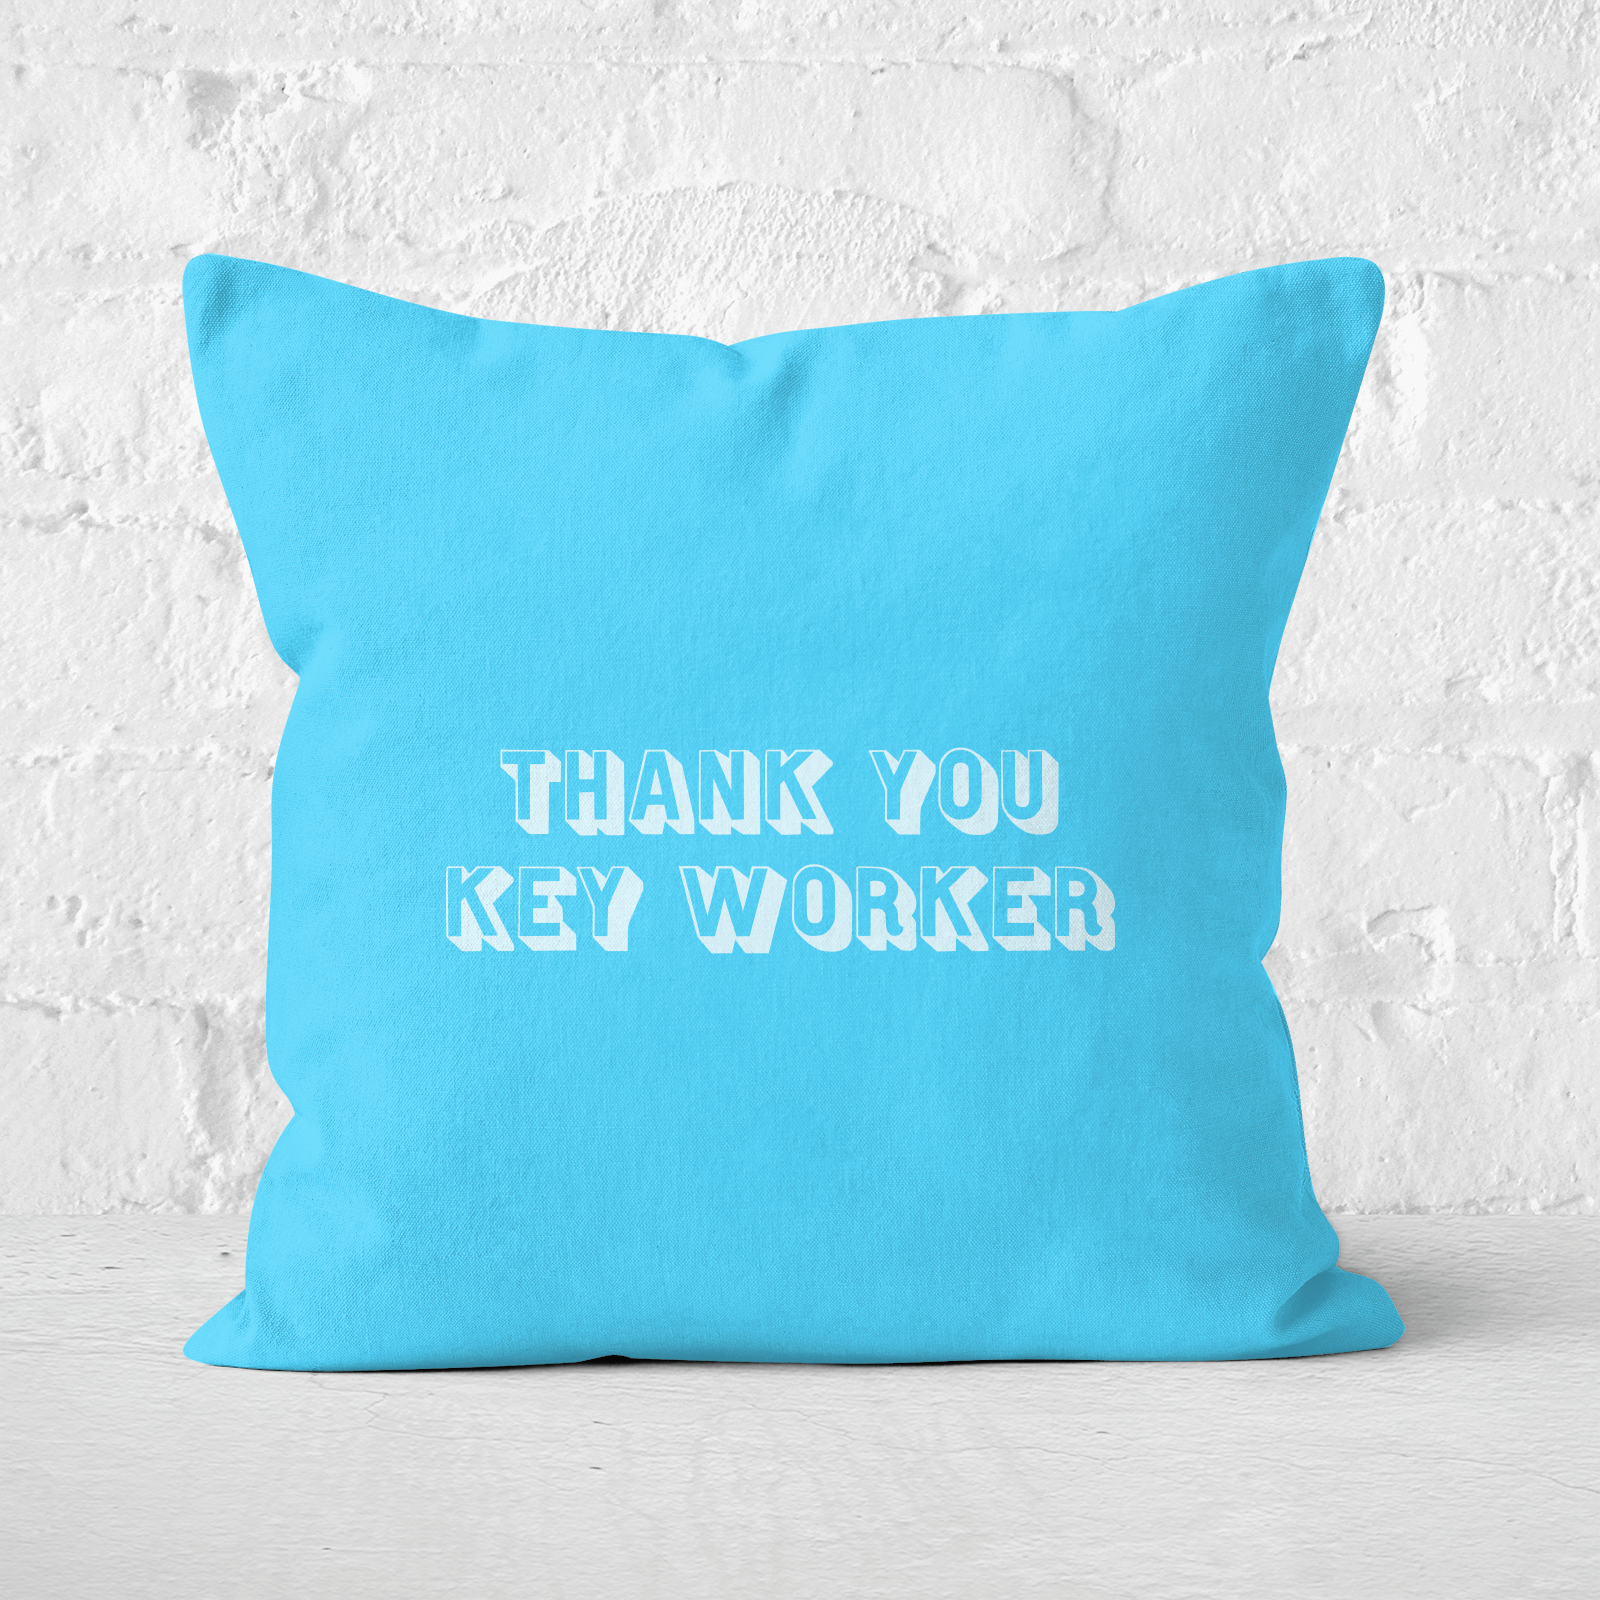 Thank You Key Worker Square Cushion - 60x60cm - Soft Touch